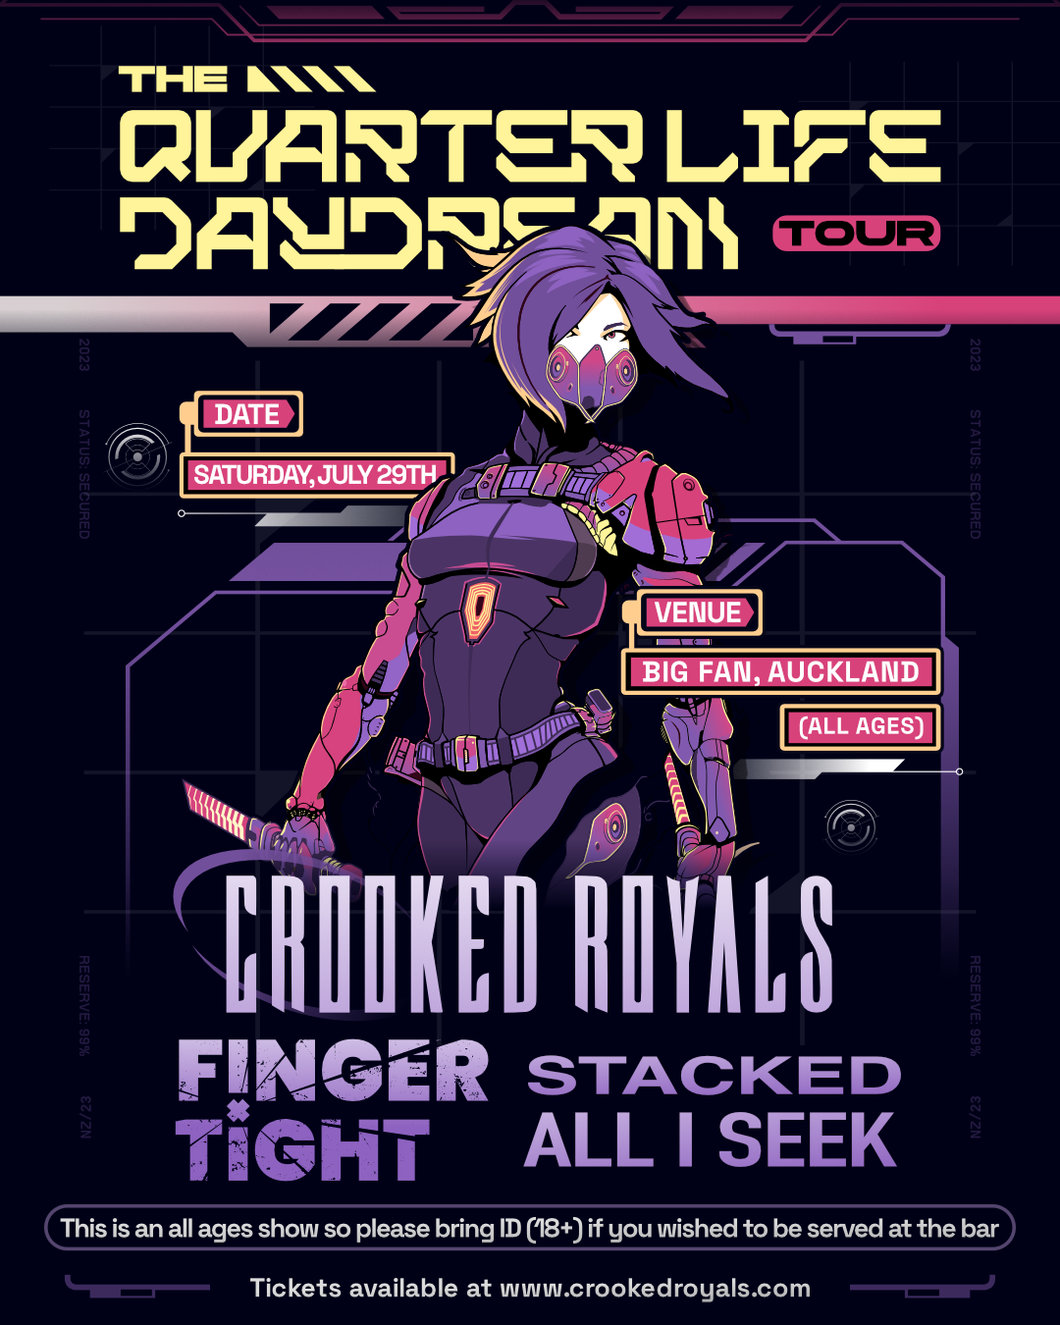 Crooked Royals “Quarter Life Daydream” New Zealand Tour - Auckland (All Ages)